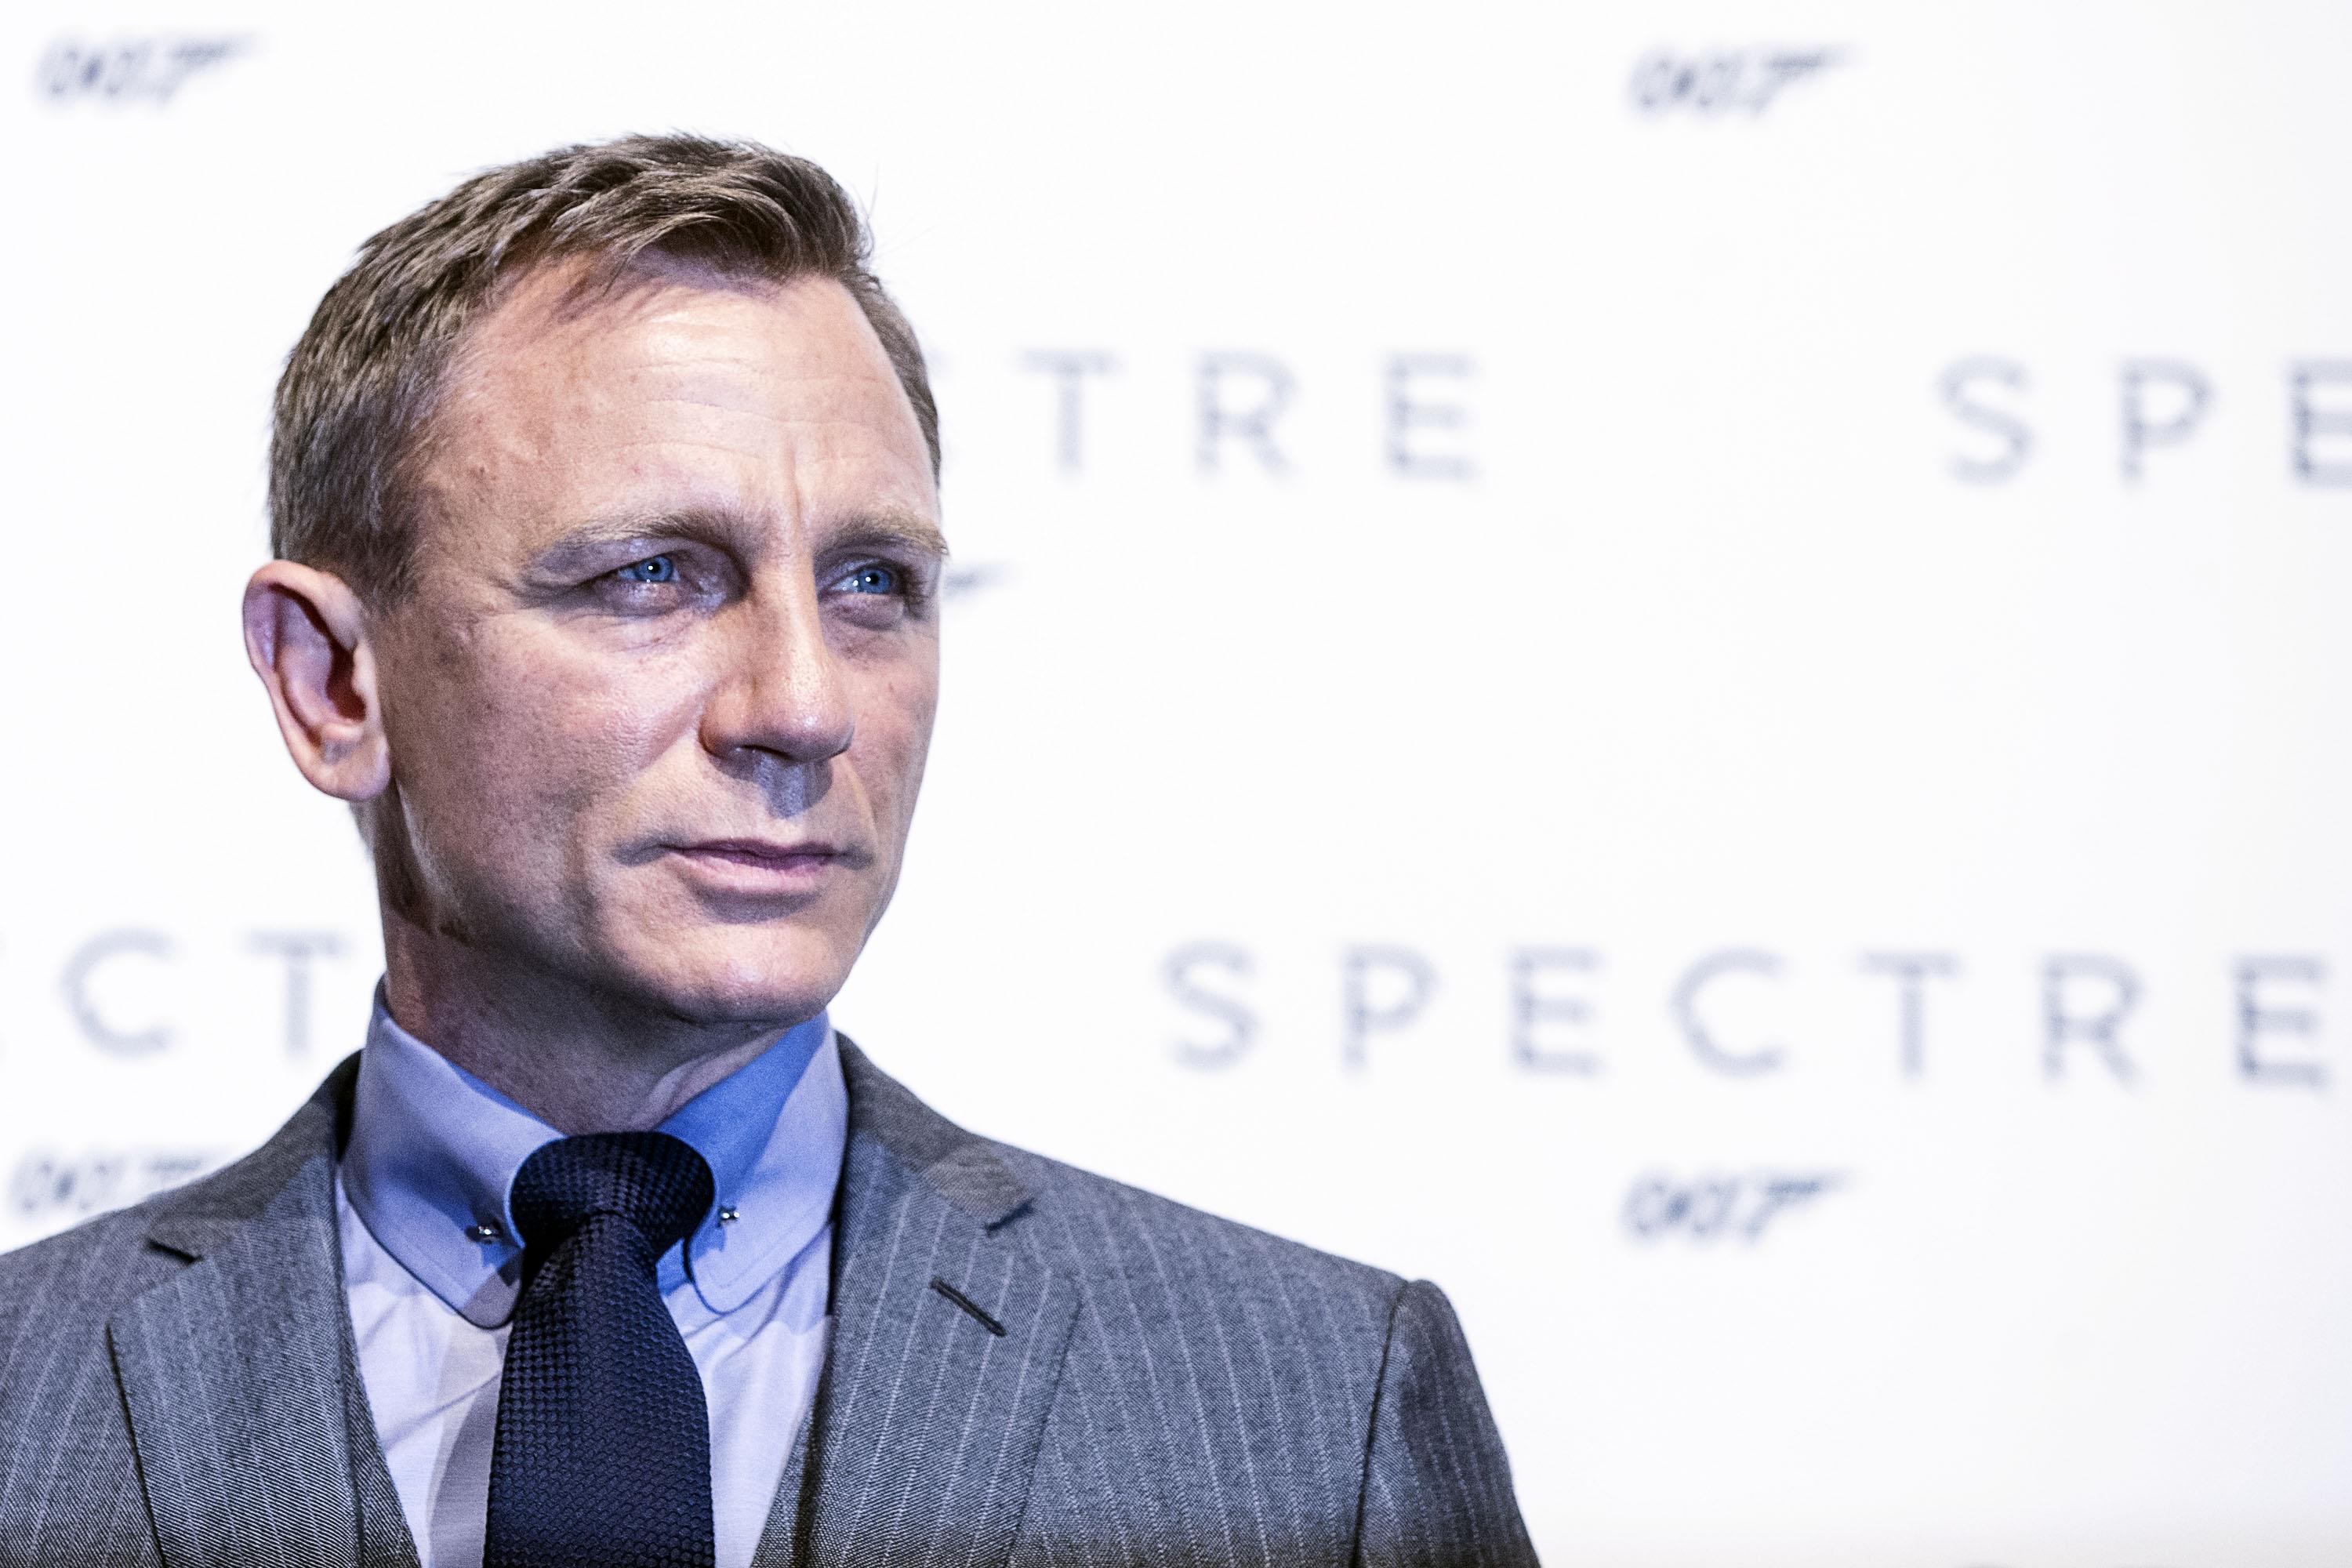 Red carpet of "Spectre" in Rome